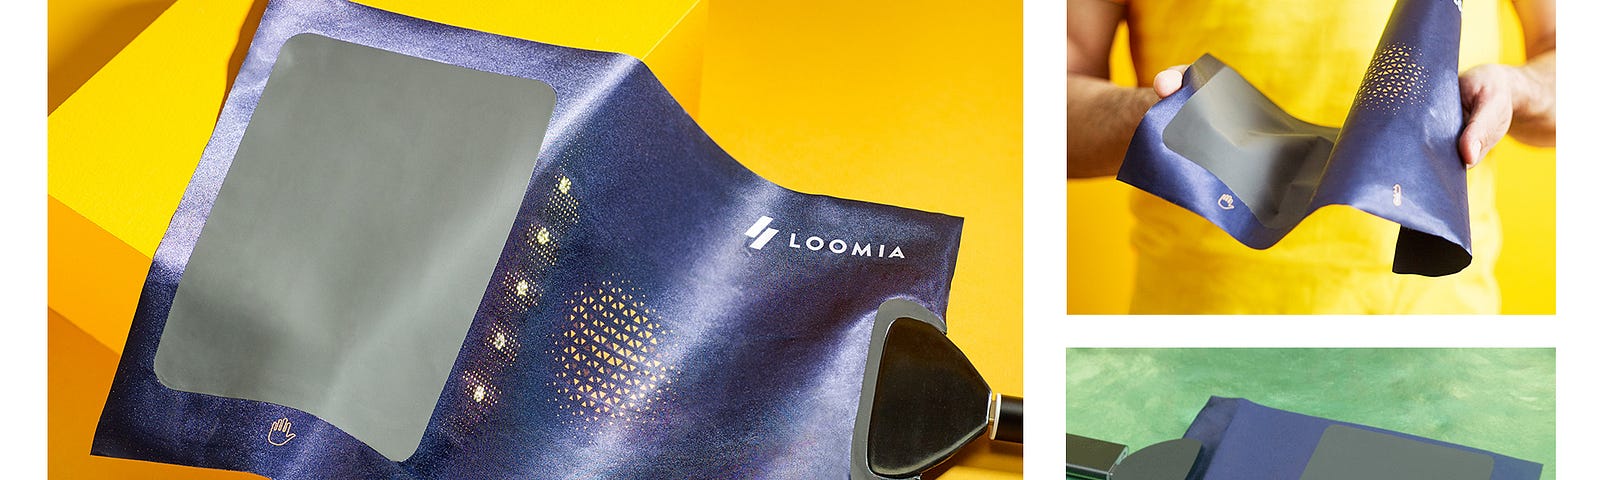 Images of the LOOMIA Electronic Layer